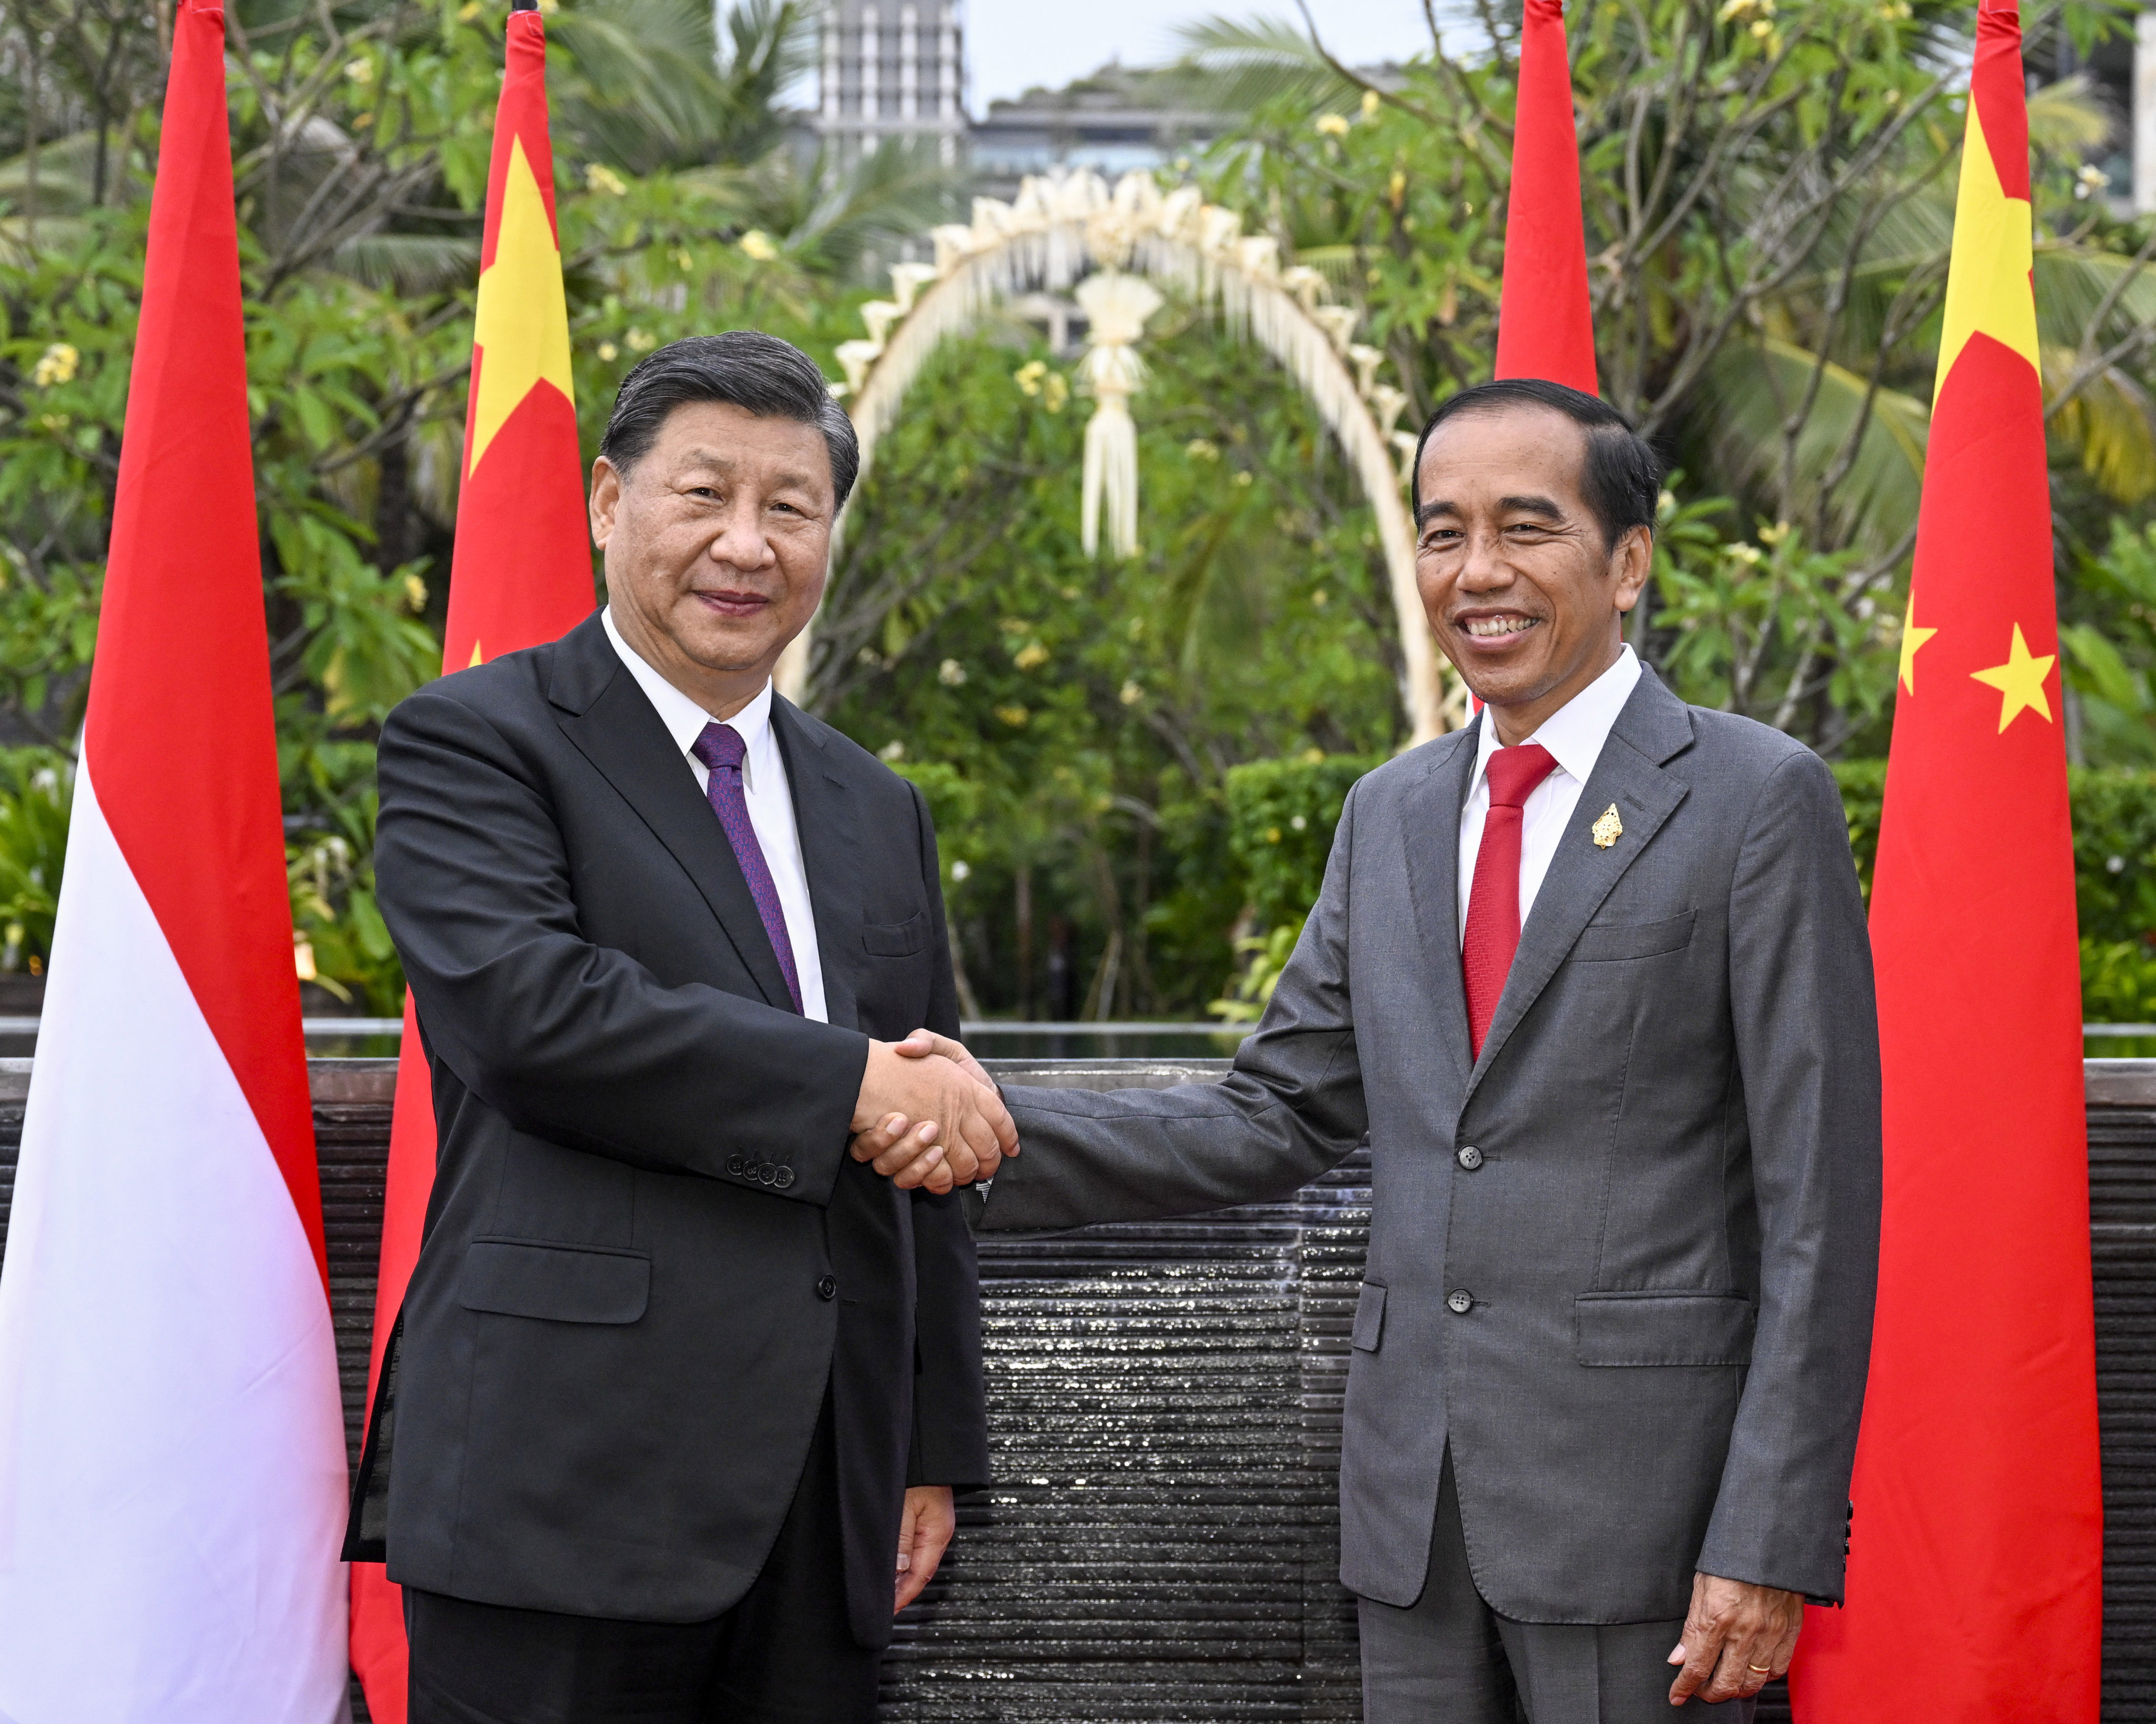 Chinese President Xi Jinping shakes hands with Indonesian President Joko Widodo in at the G20 Bali summit in November. Photo: Xinhua